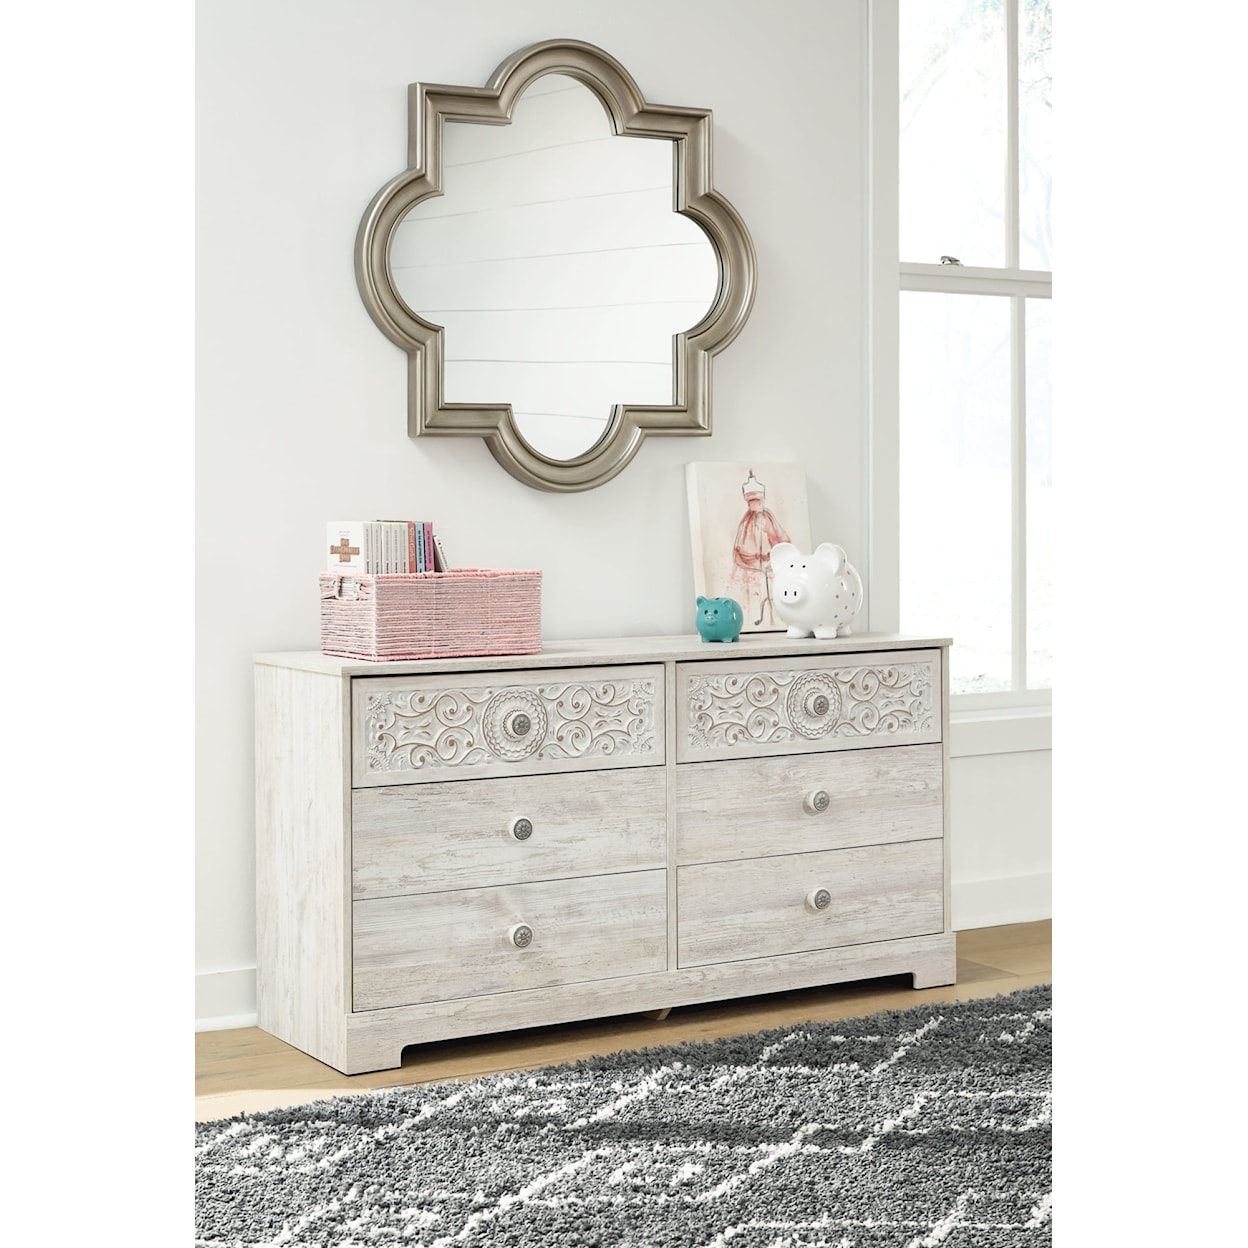 Signature Design by Ashley Paxberry Six Drawer Dresser